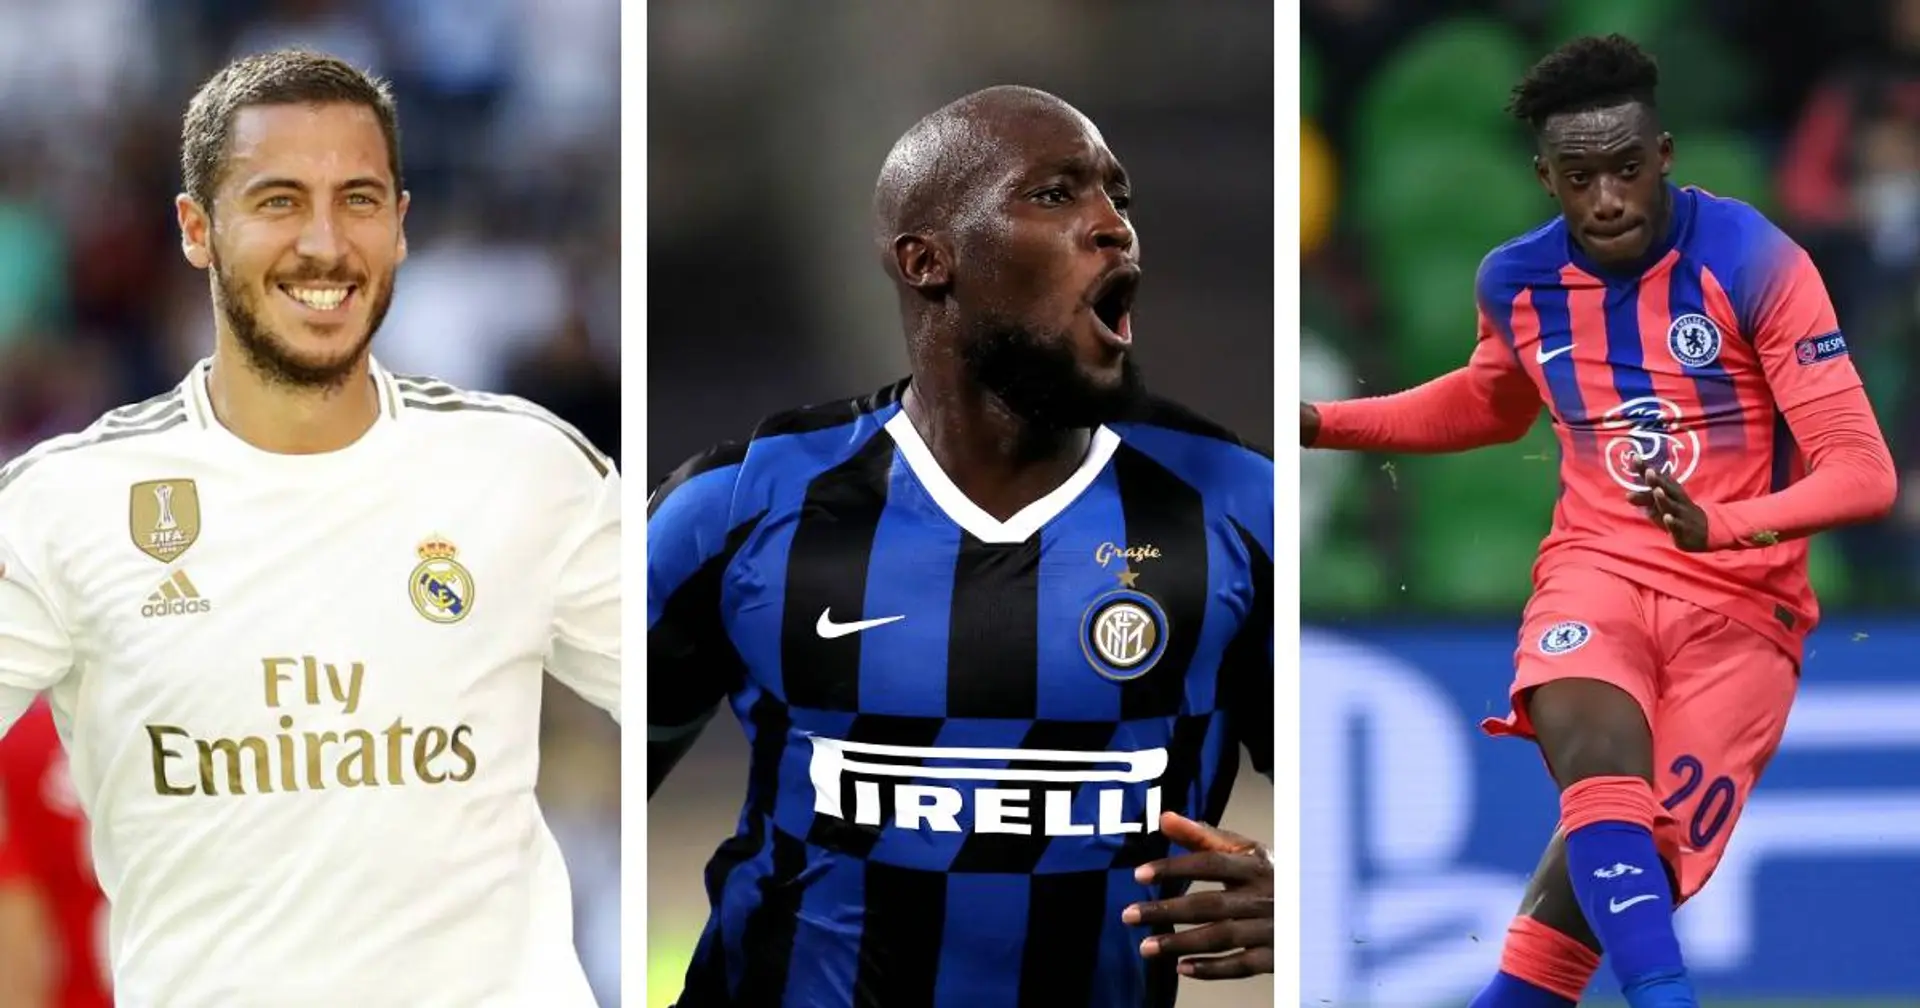 Lukaku to Chelsea & 4 more transfer rumours you should believe the least now